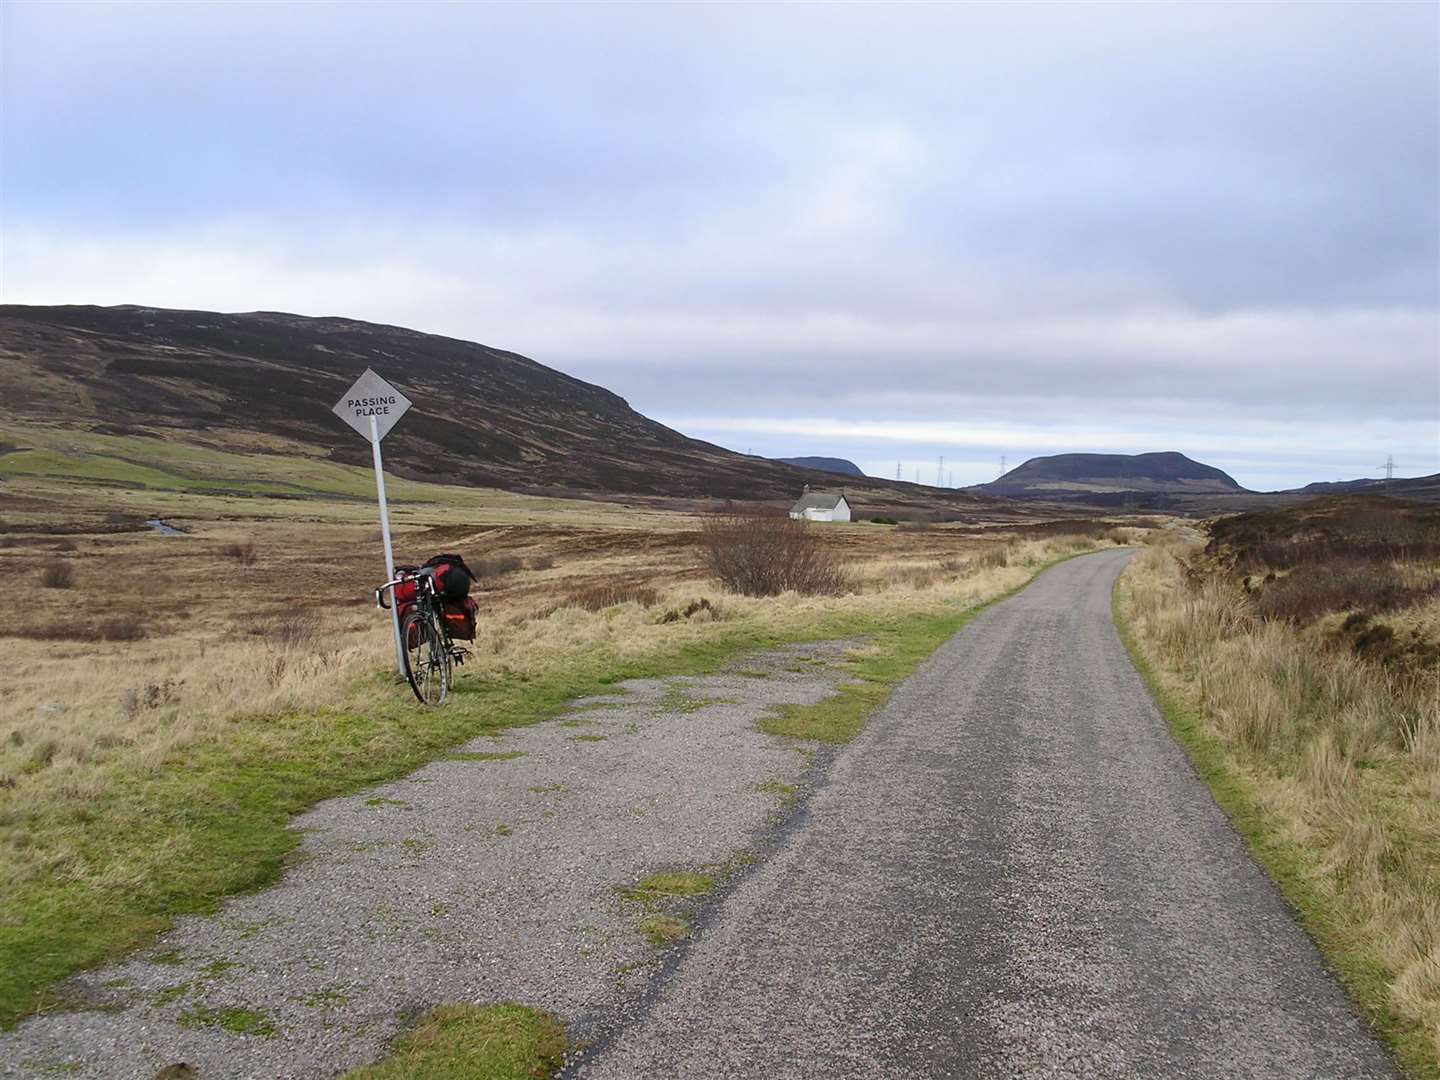 The road past Loch Buidhe in Strath Carnaig.